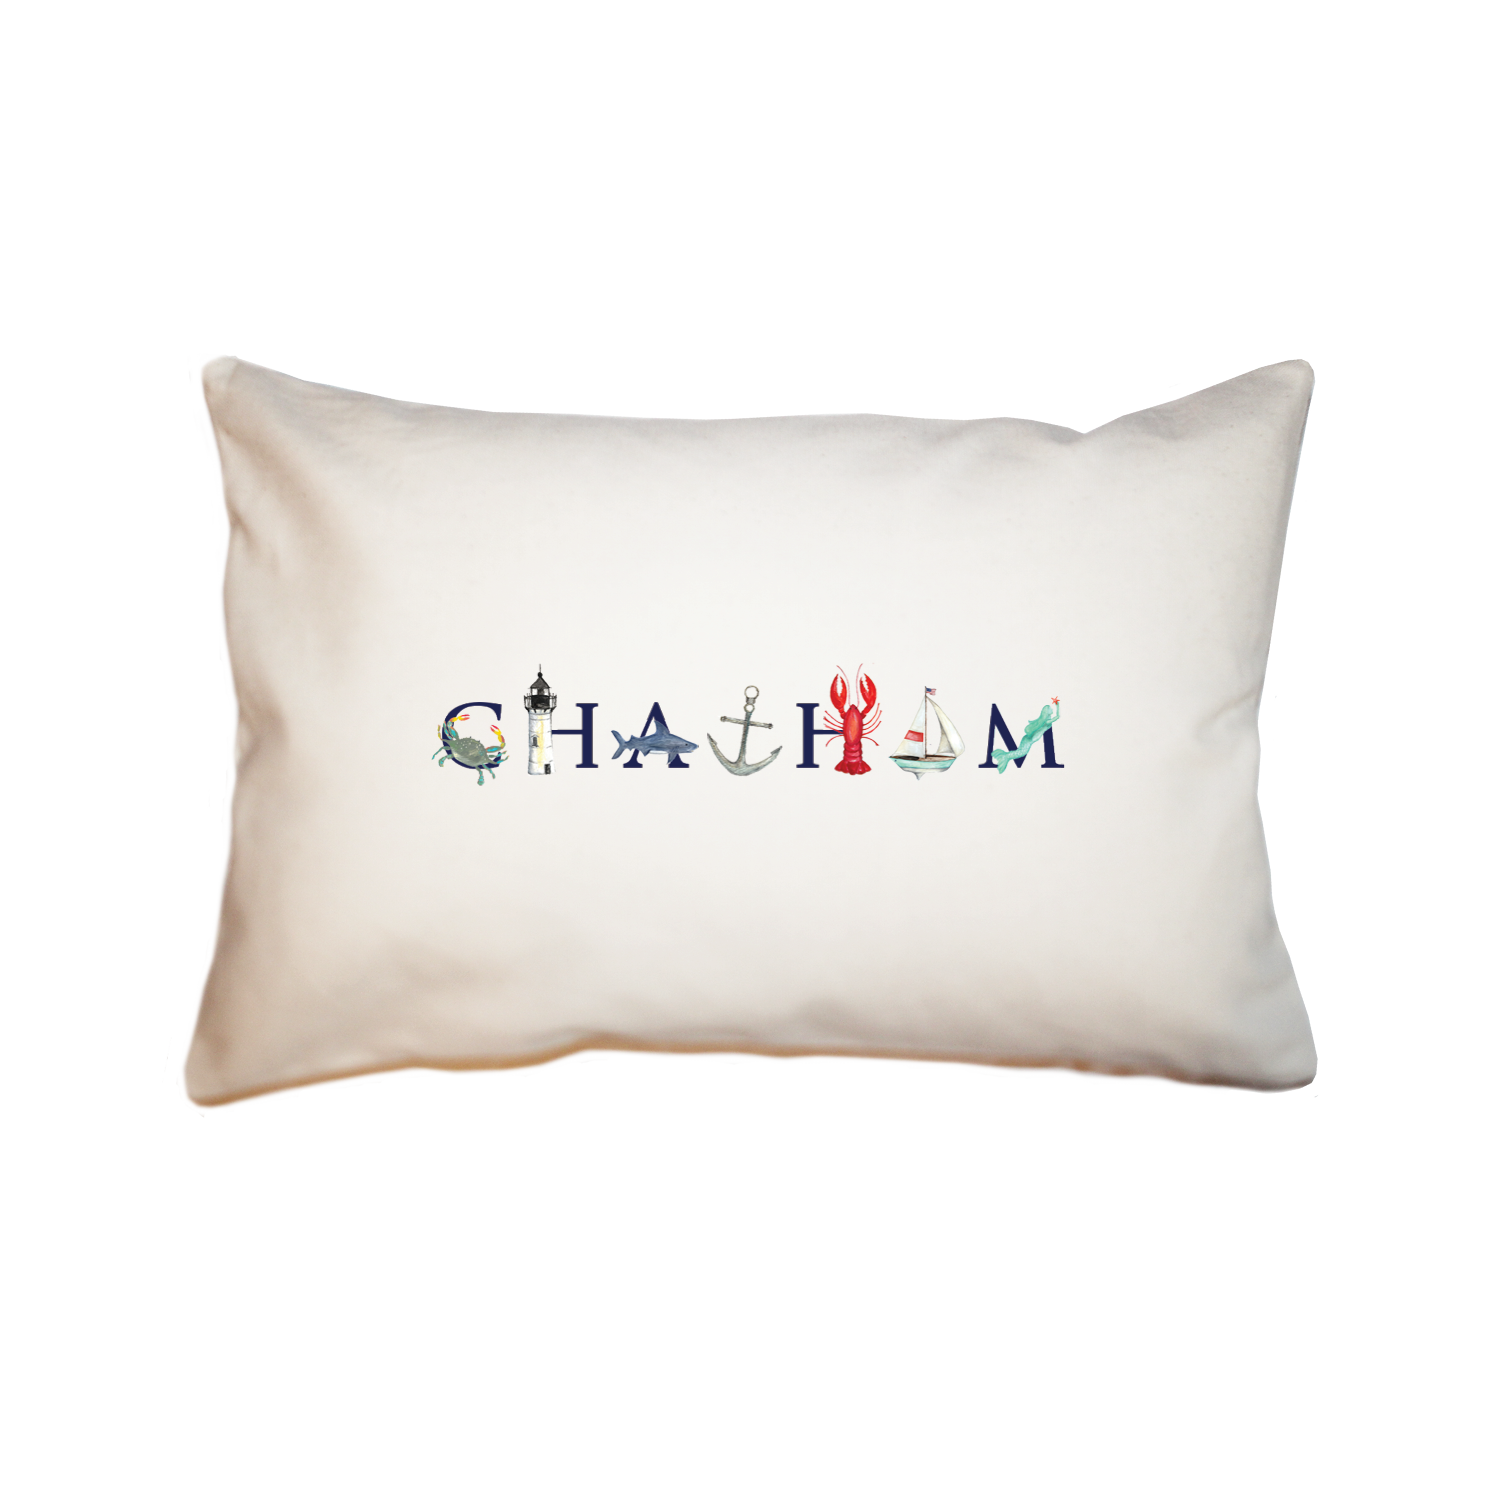 Chatham large rectangle pillow